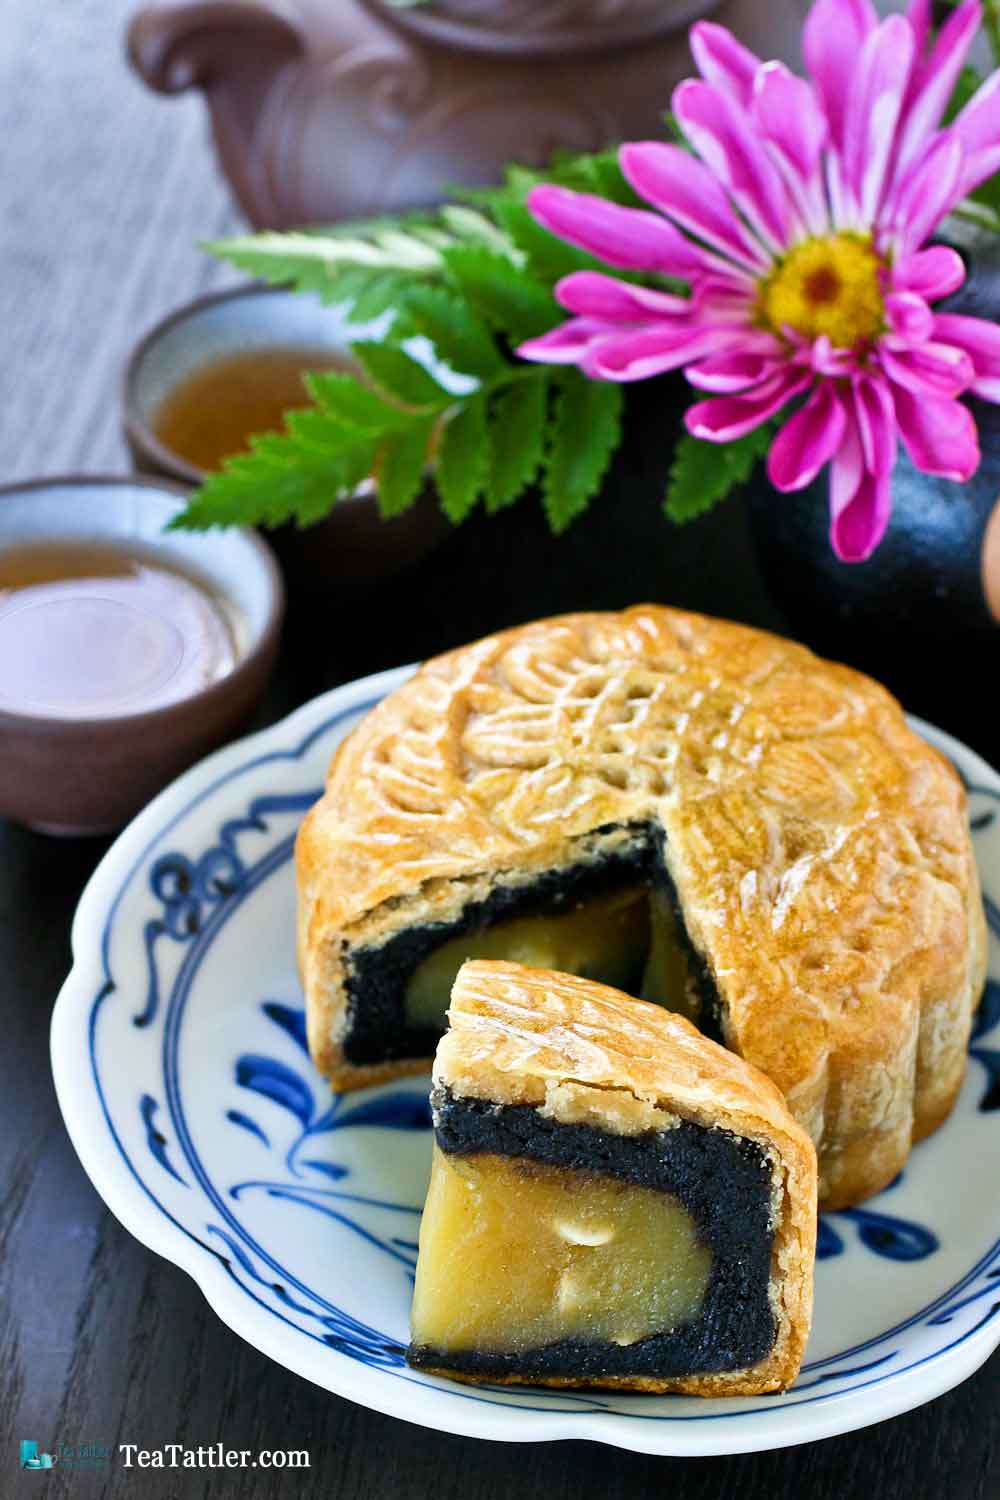 Black Sesame and Lotus Paste Mooncakes for the Mid Autumn Festival celebrated on the 15th day of the 8th moon of the Lunar calendar. | TeaTattler.com #mooncakes #midautumnfestival #mooncakefestival